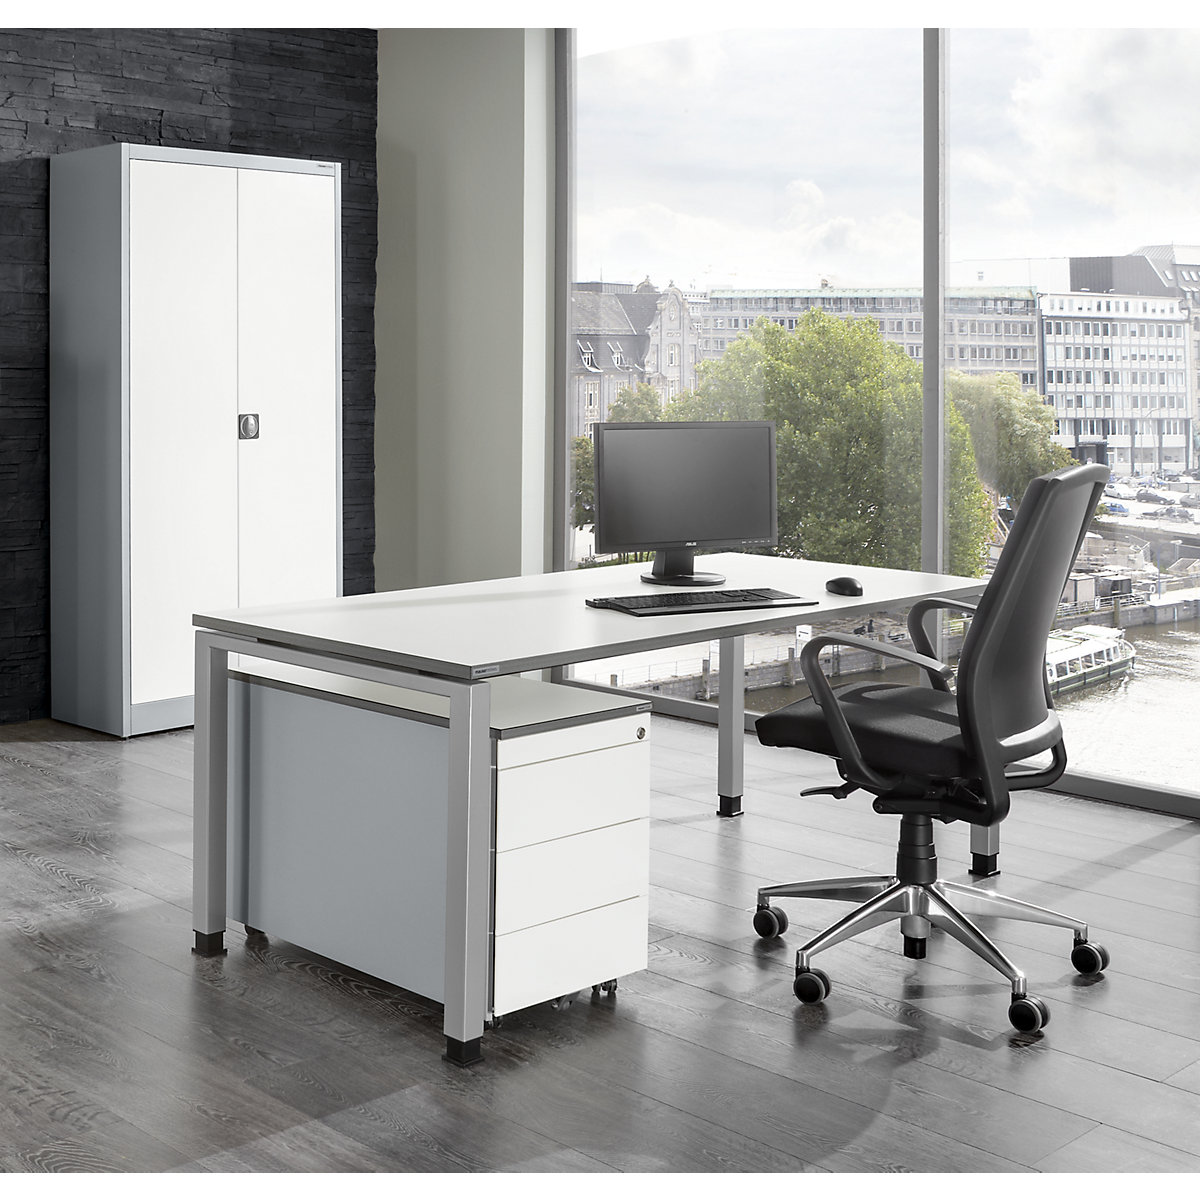 ARCOS complete office – mauser